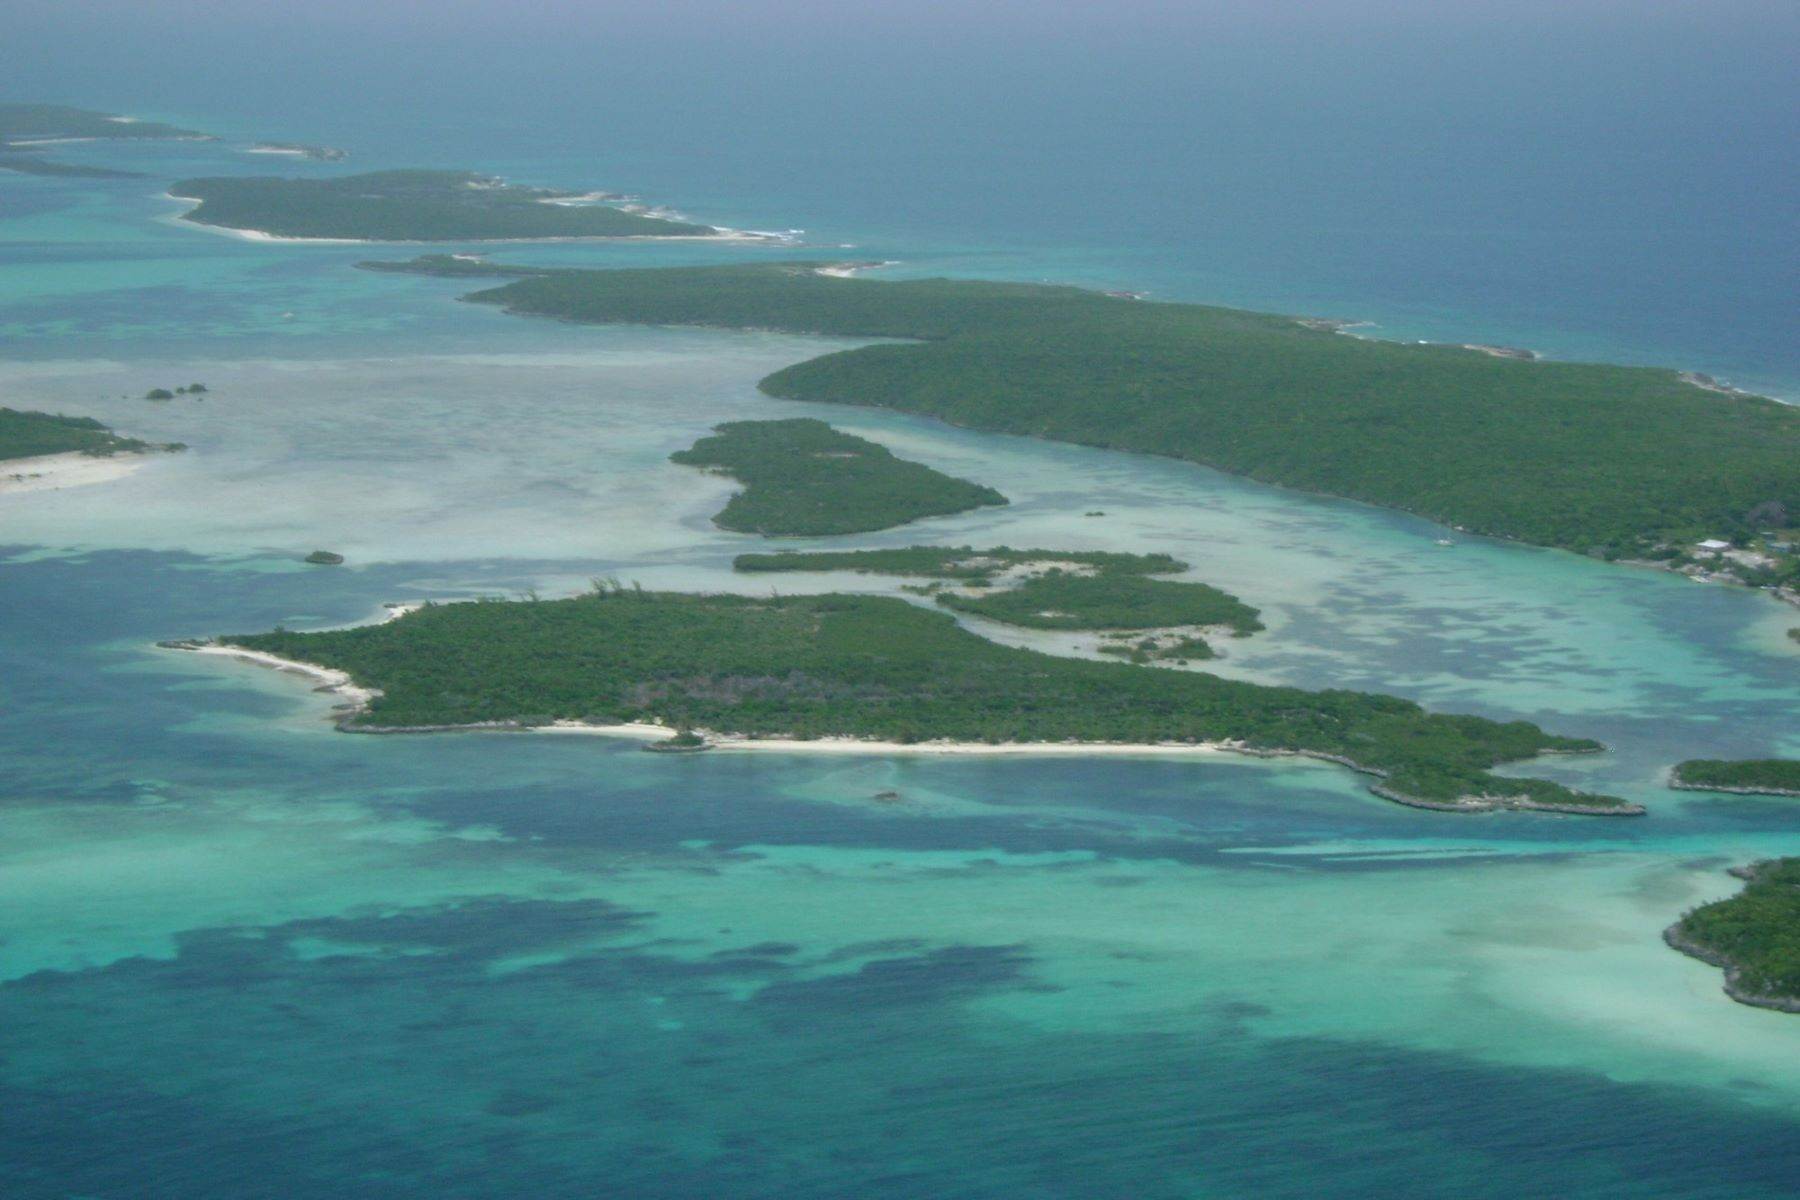 3. Private Islands for Sale at Sand Dollar Cay 24 Acres Berry Islands, Bahamas